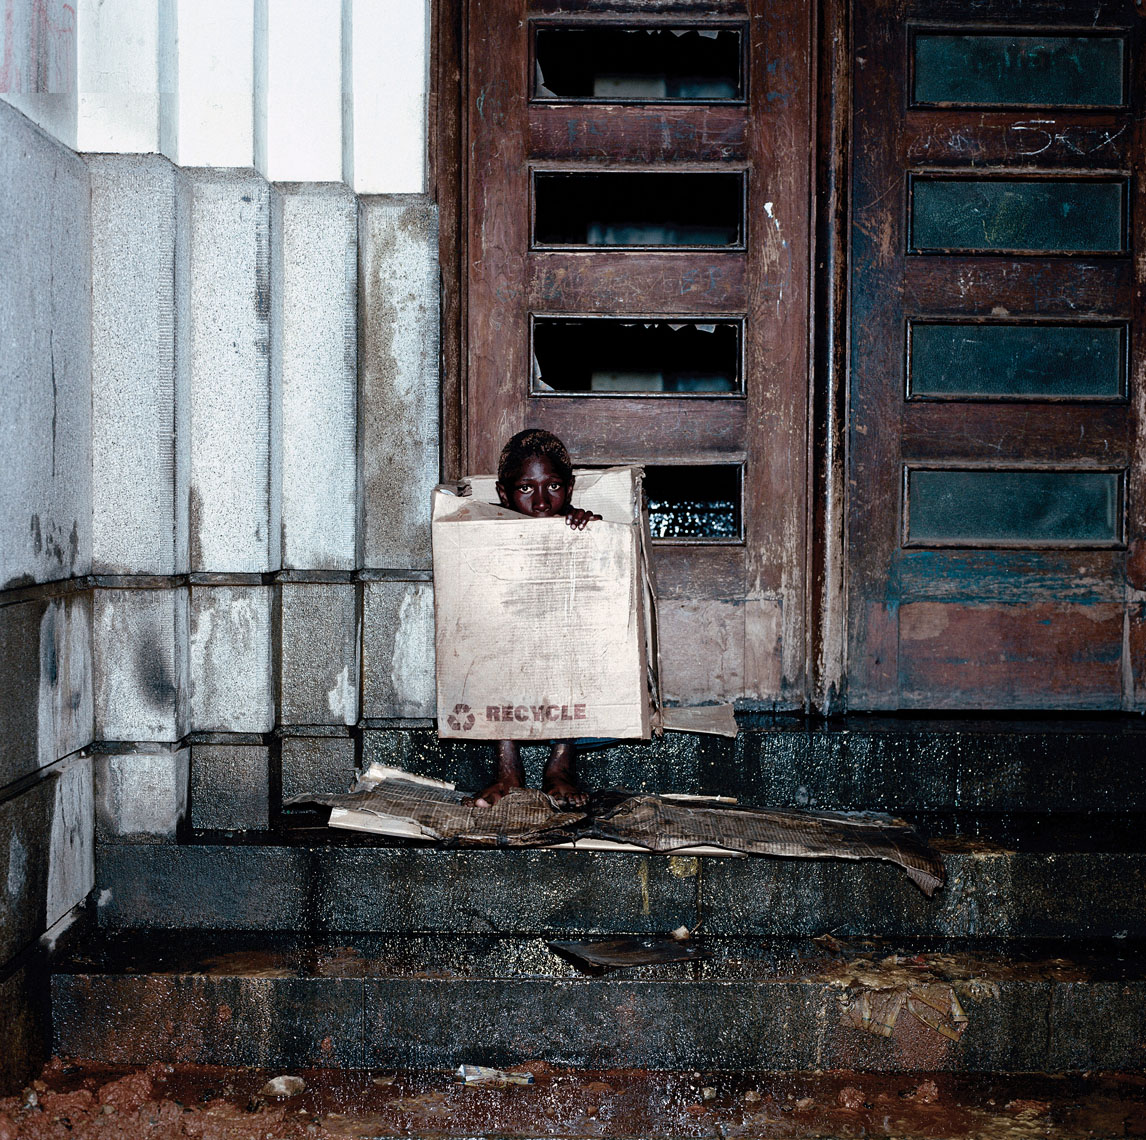 Portrait of a homeless child sitting under cardboard boxes to keep warm. 